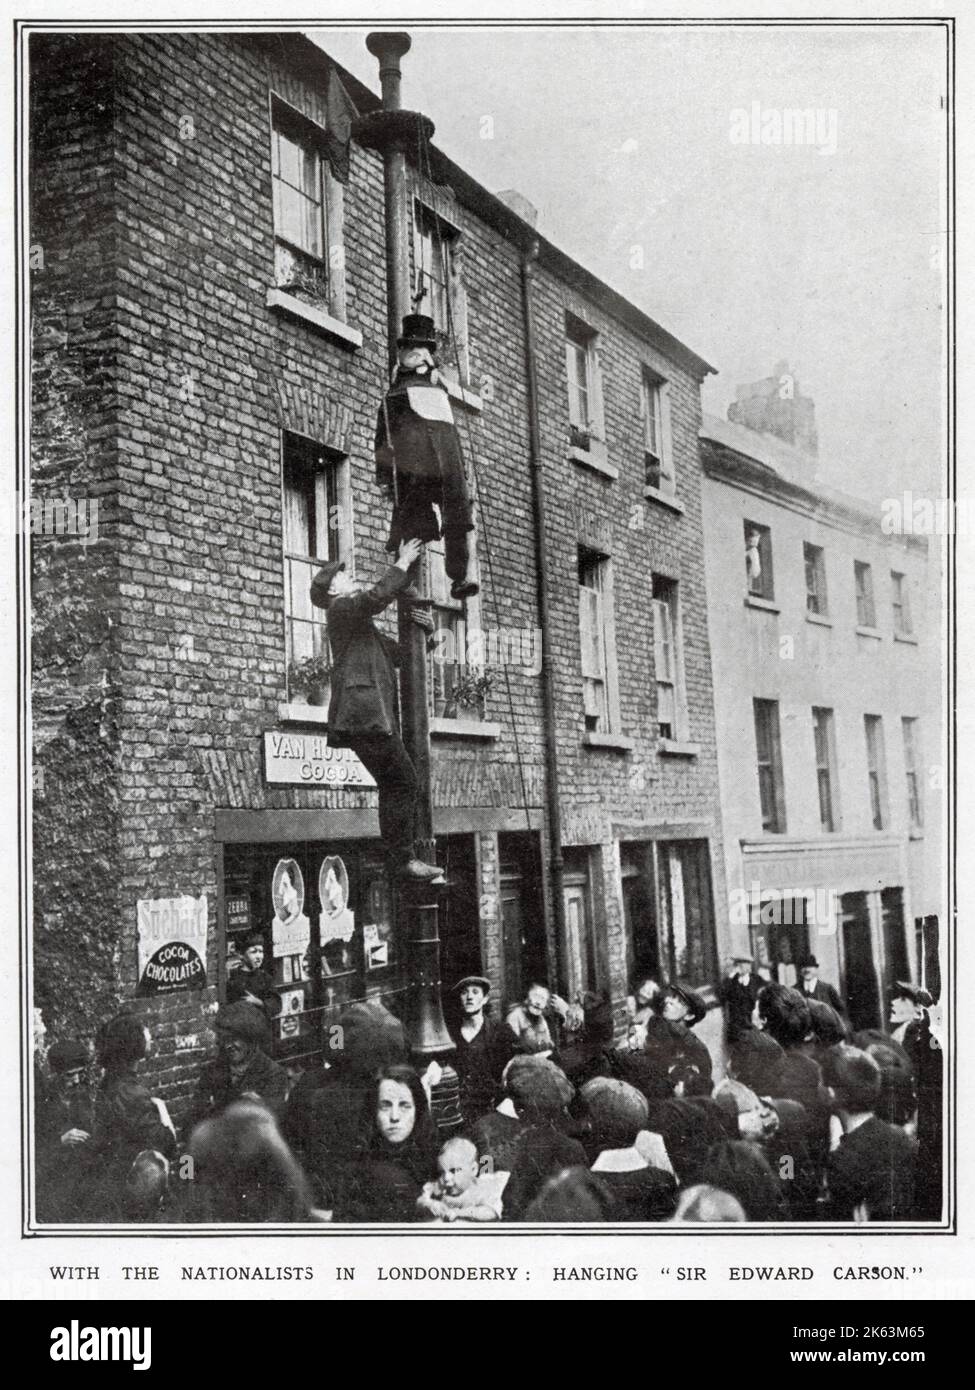 The annual celebration of the 'Relief of Derry', attracted a large group of nationalist protesters in Londonderry, commemorate the events in 1689 when a 105 day siege of the city by Jacobites was finally ended.  Photograph showing an effigy of Sir Edward Carson an Irish unionist politician, hanging from a lamp post in the streets of the city. Stock Photo